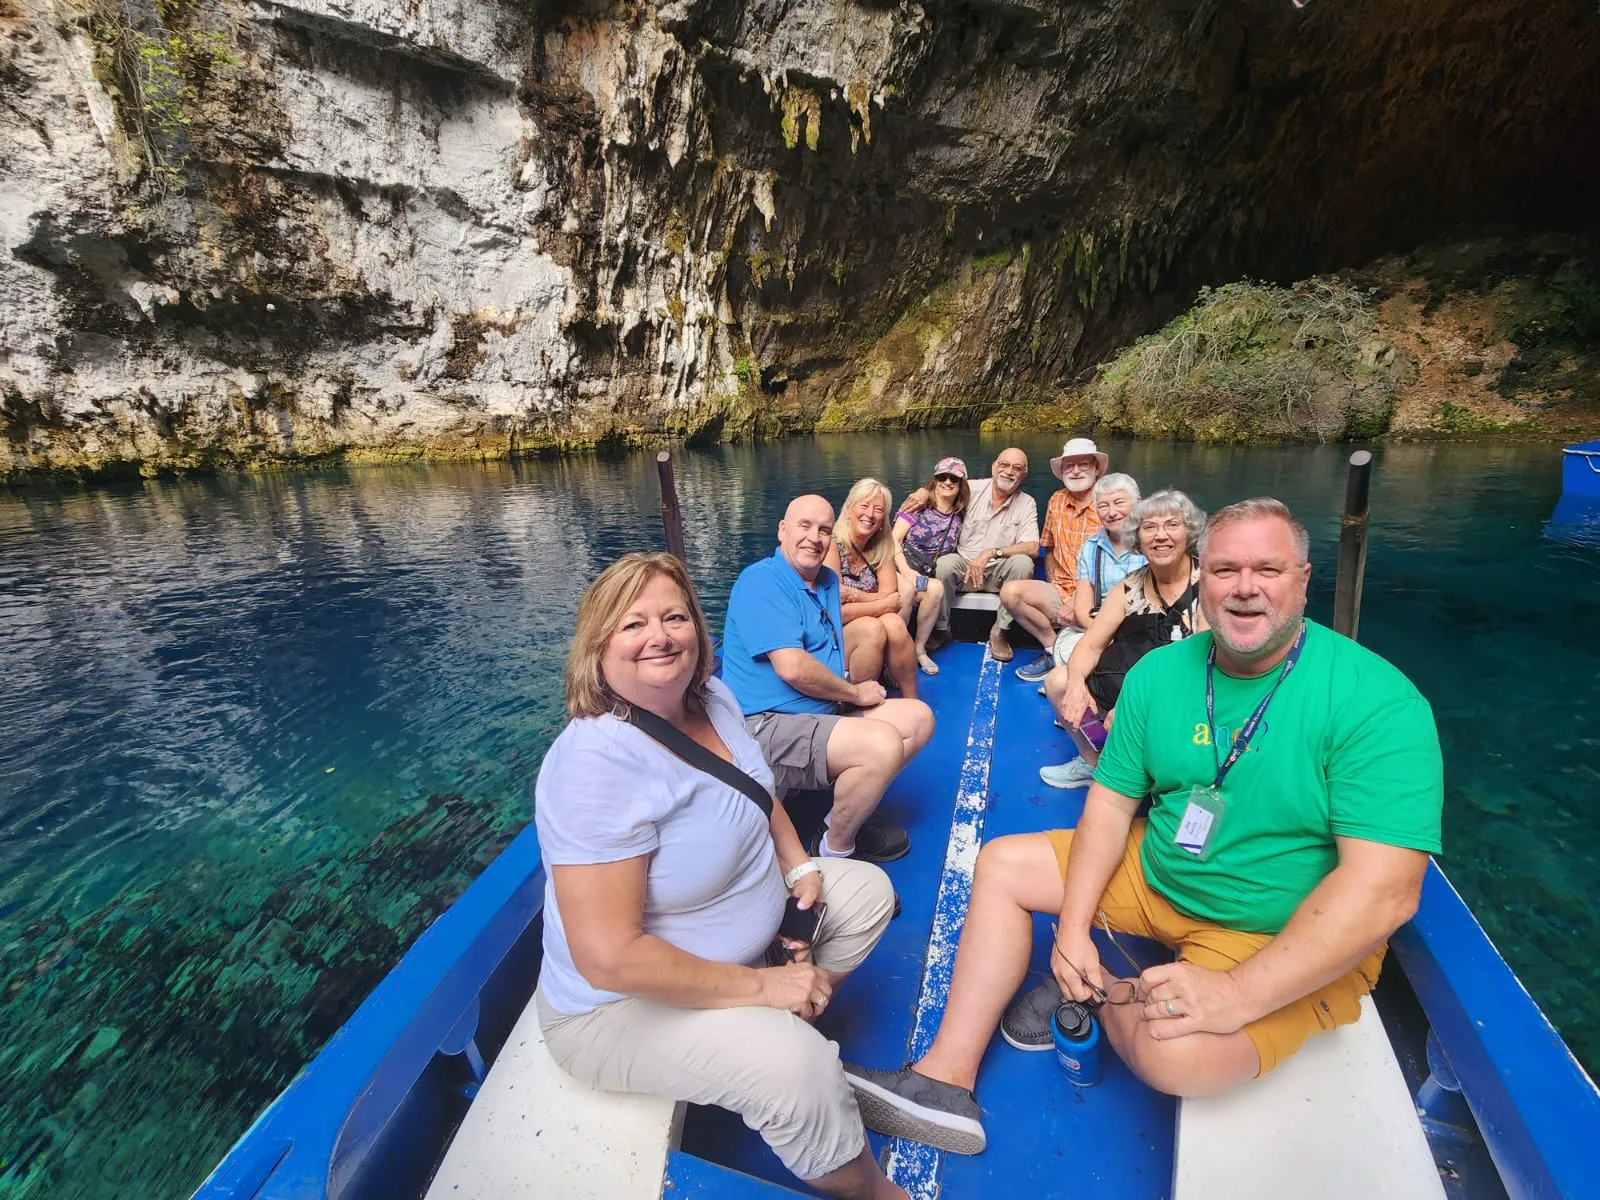 Travellers smiling on a boat ride through the Drongarati Caves